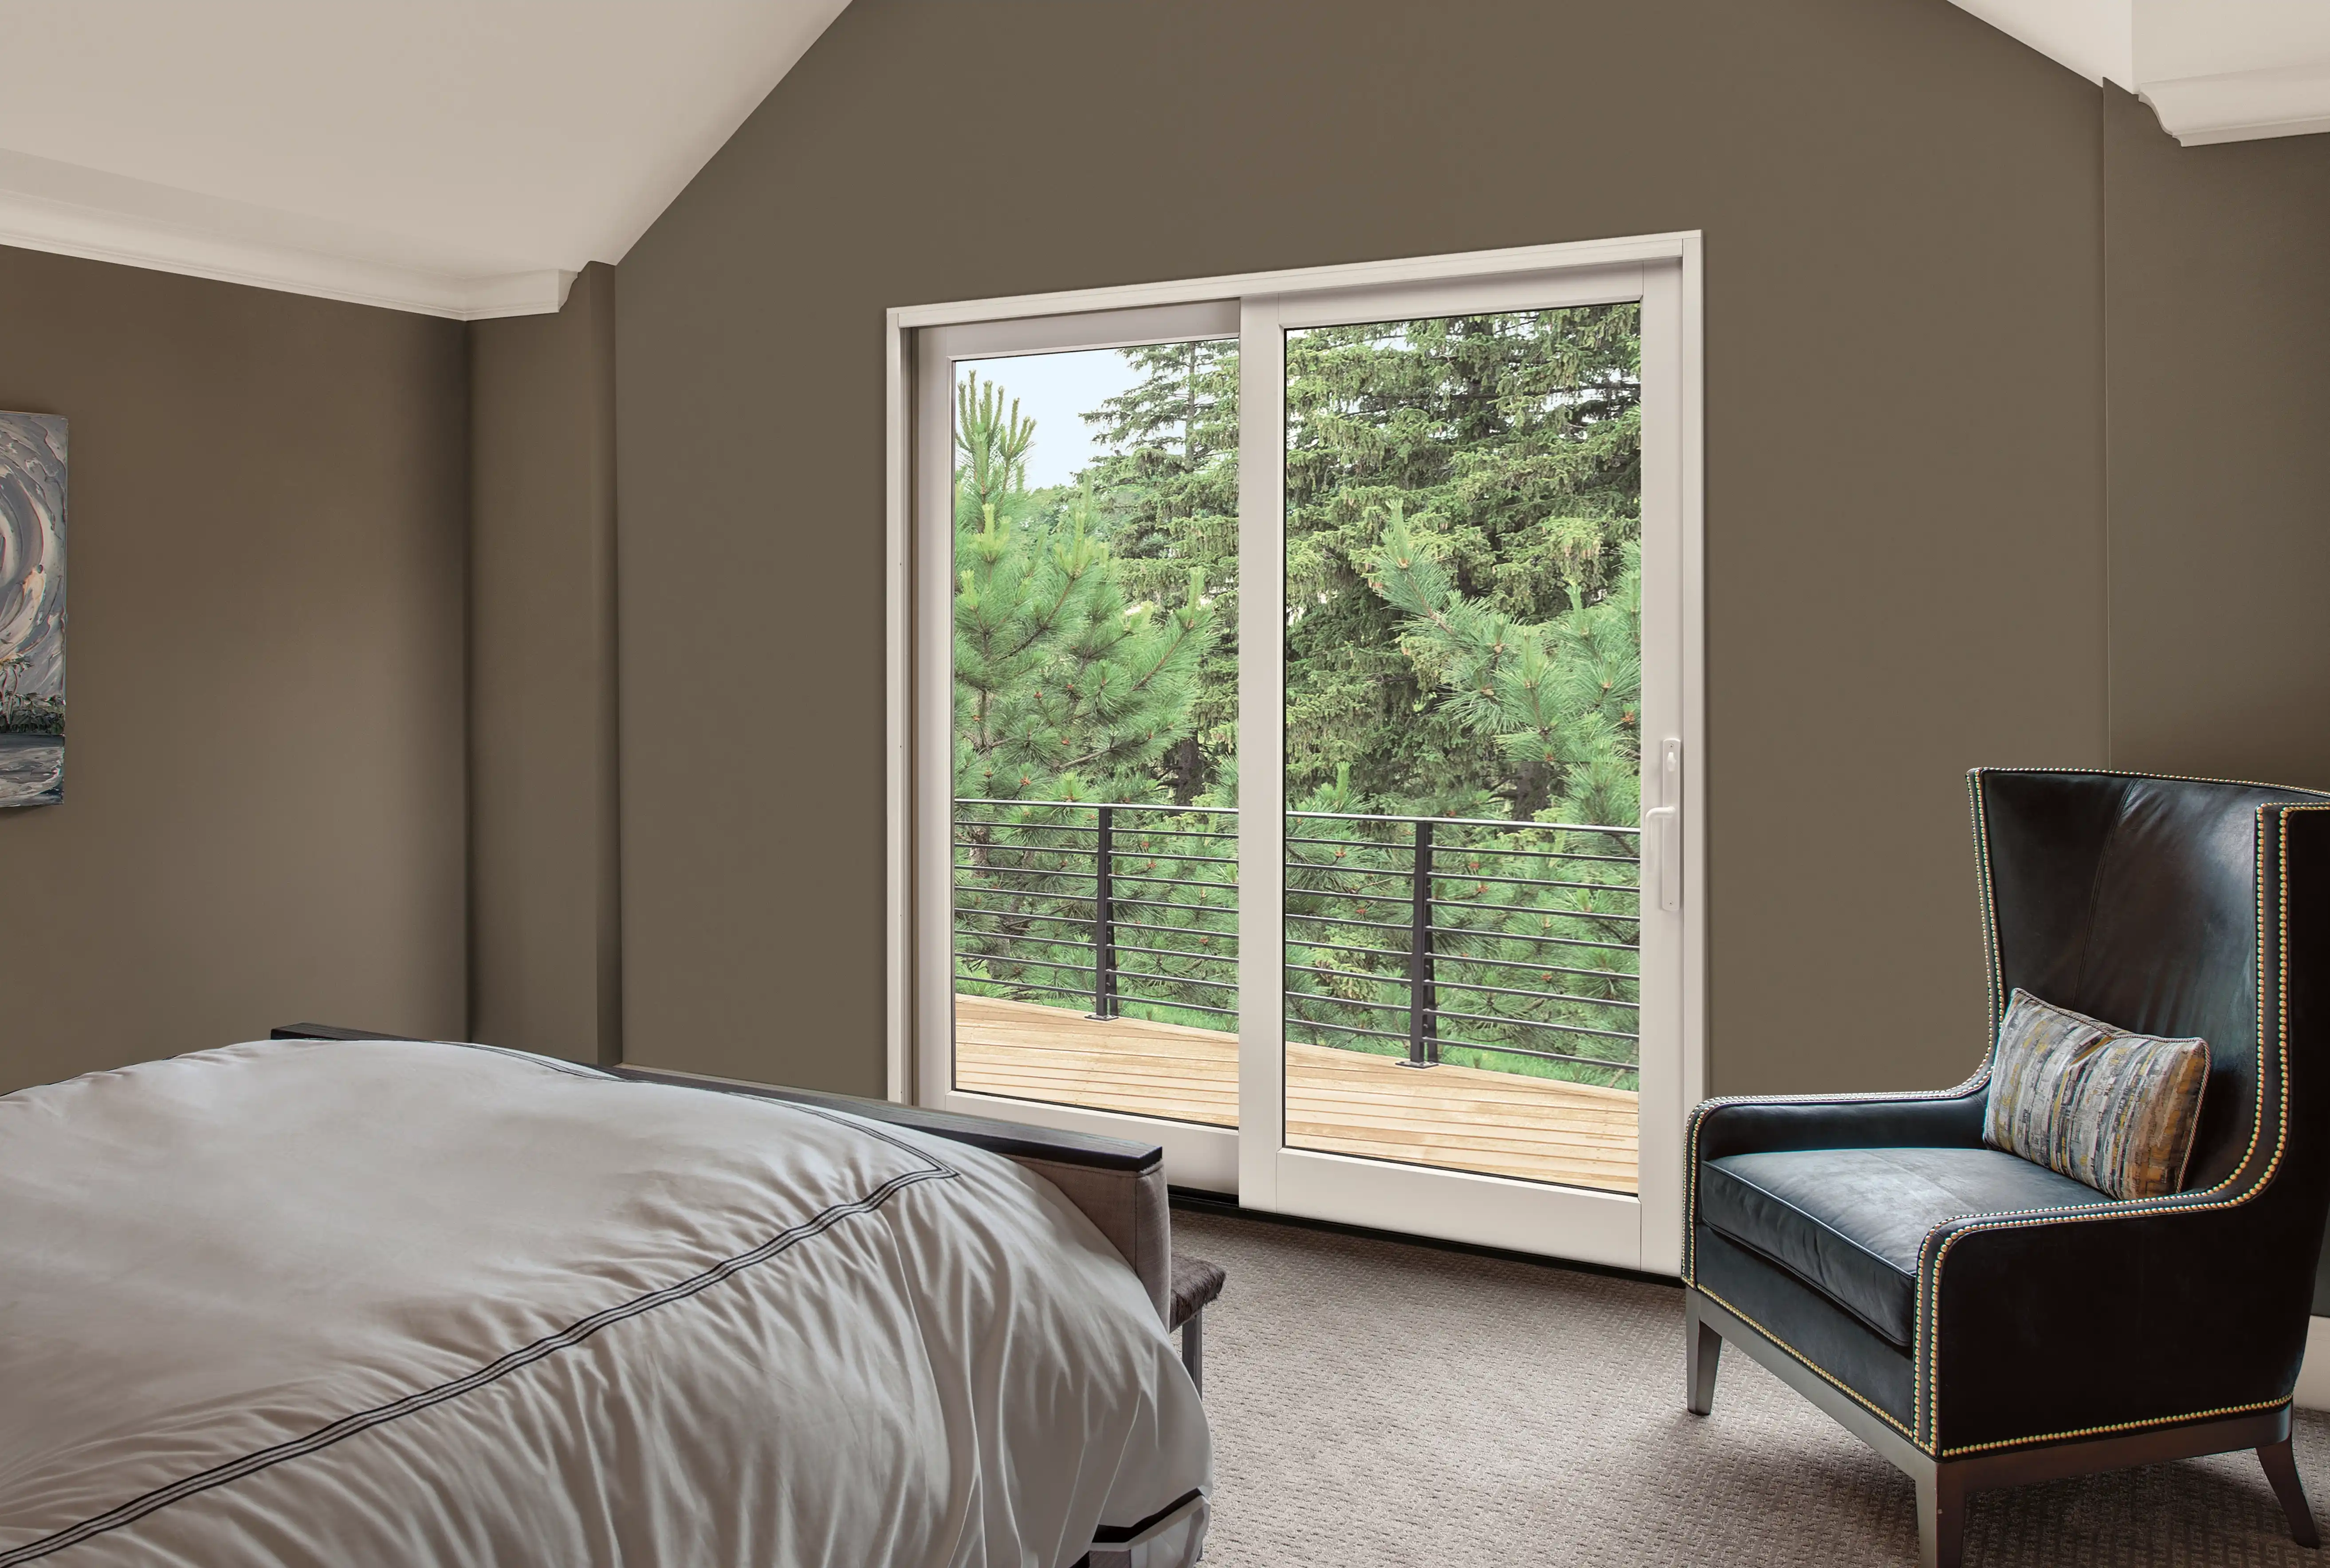 Marvin Replacement Sliding French patio door in a taupe colored bedroom.